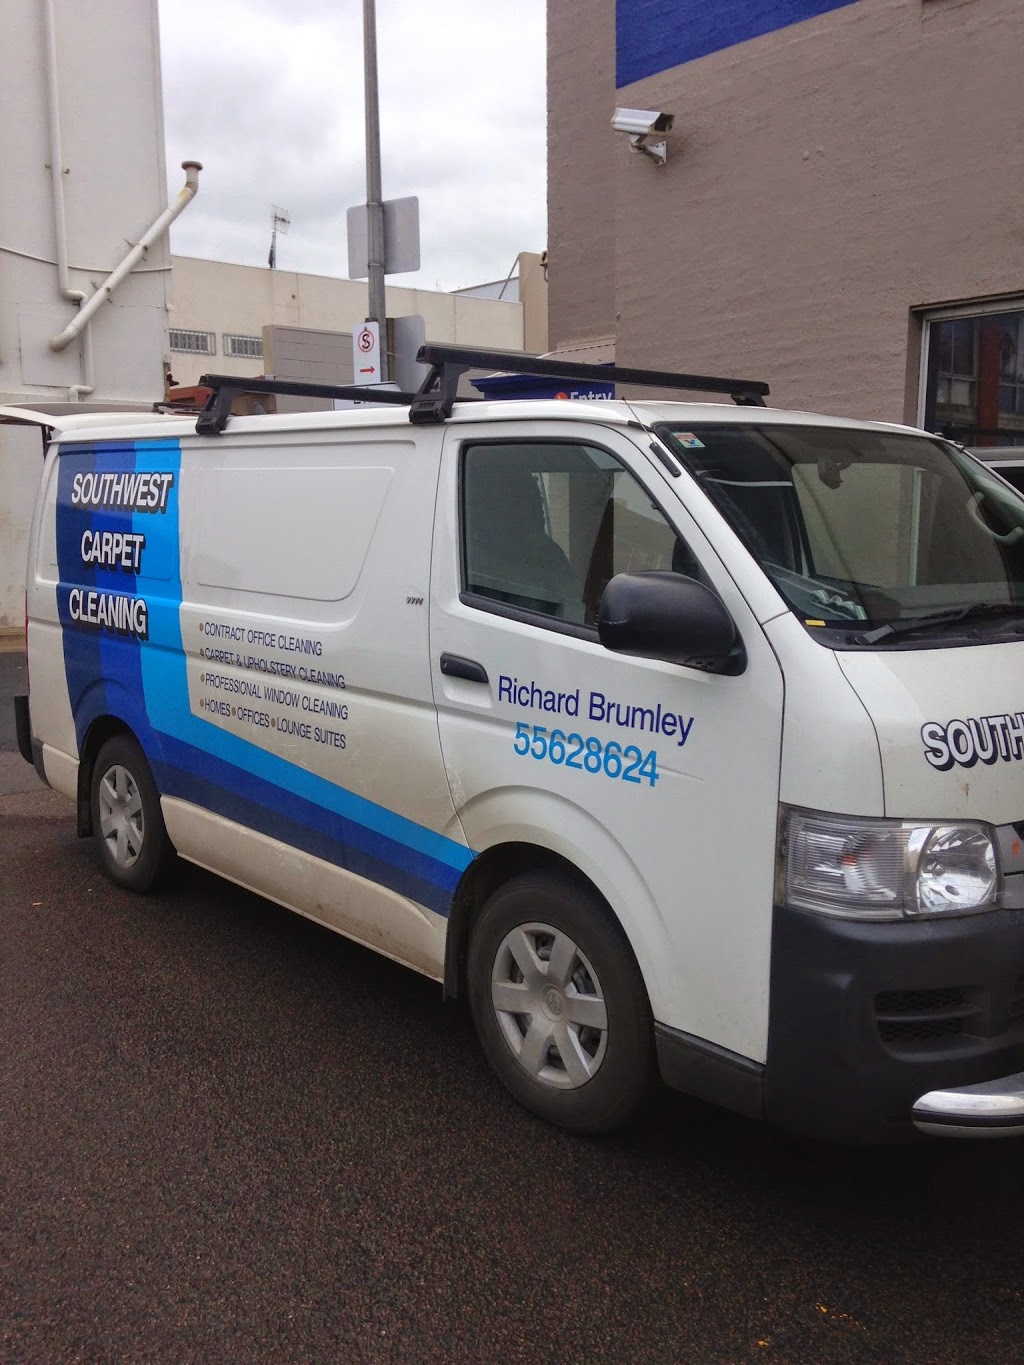 Southwest carpet cleaning | laundry | 17 Ponting Dr, Warrnambool VIC 3280, Australia | 0417520556 OR +61 417 520 556